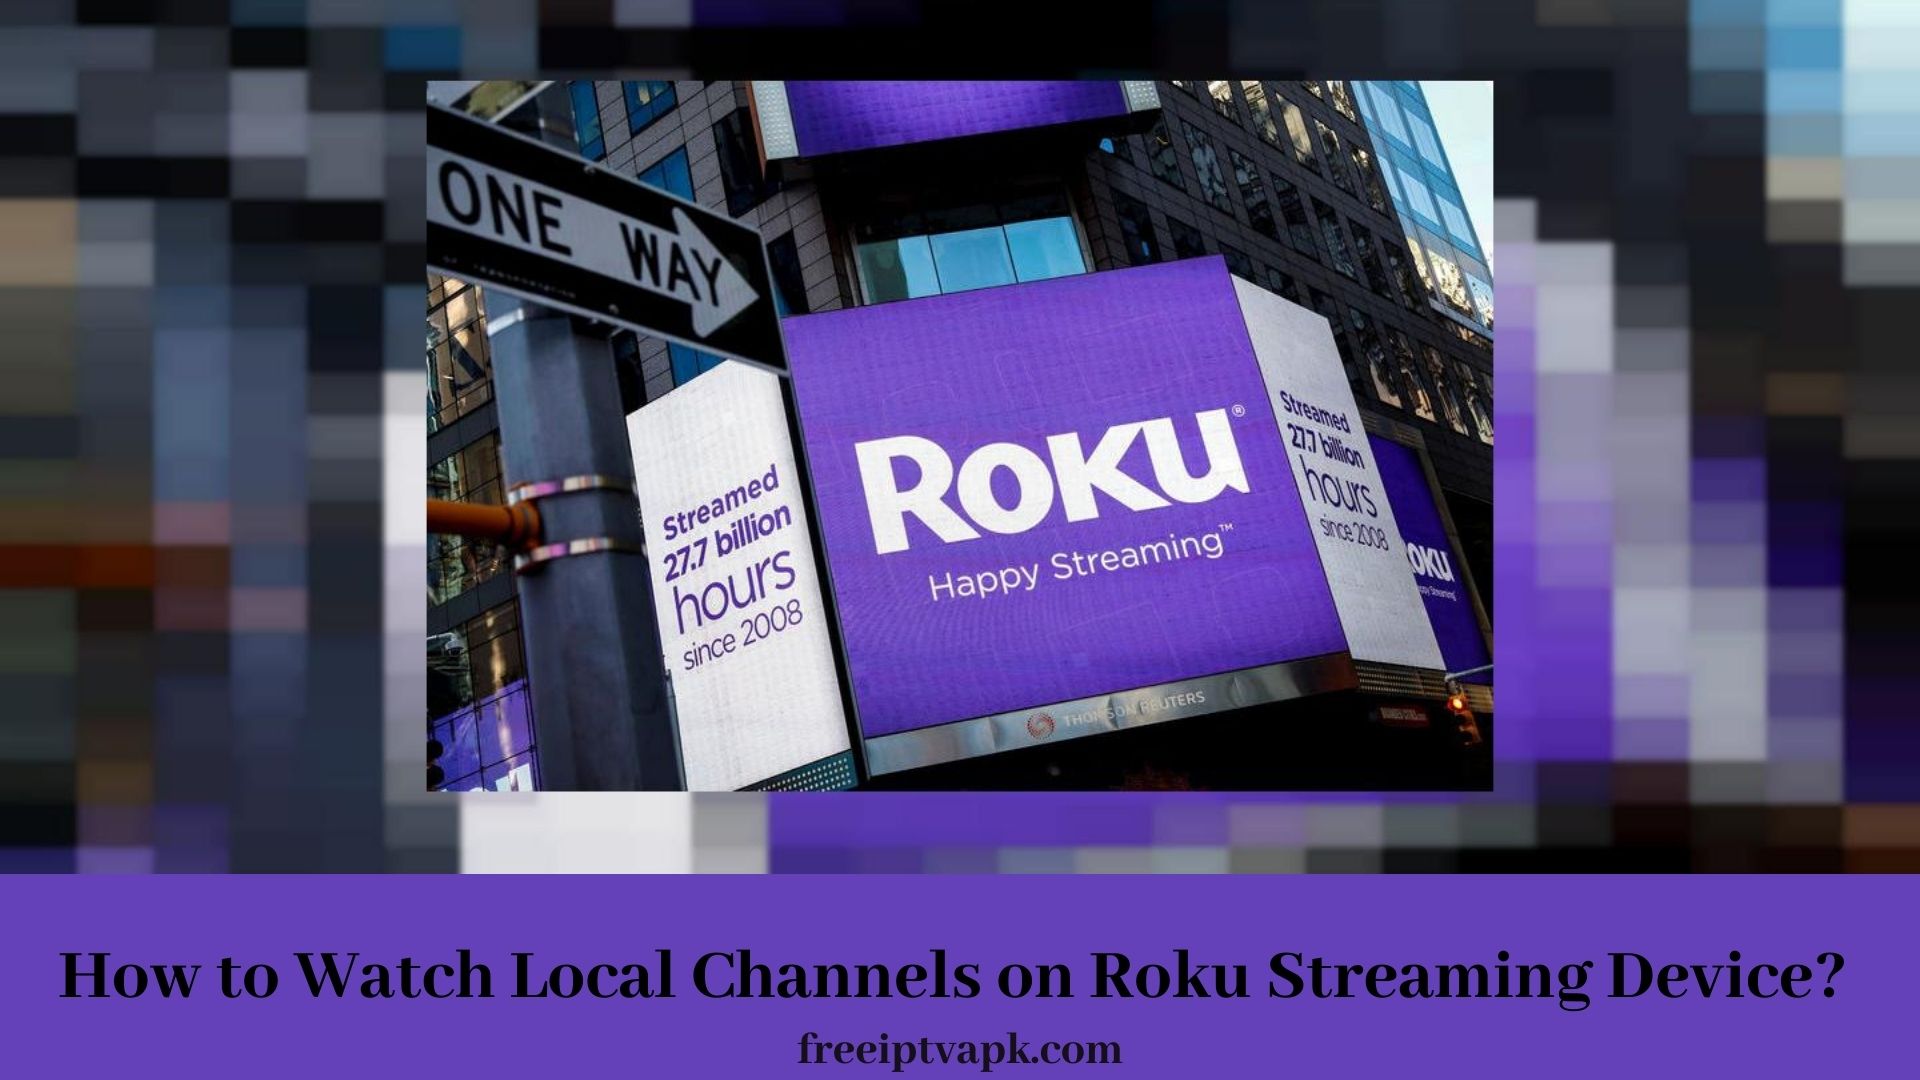 Local Channels on Roku